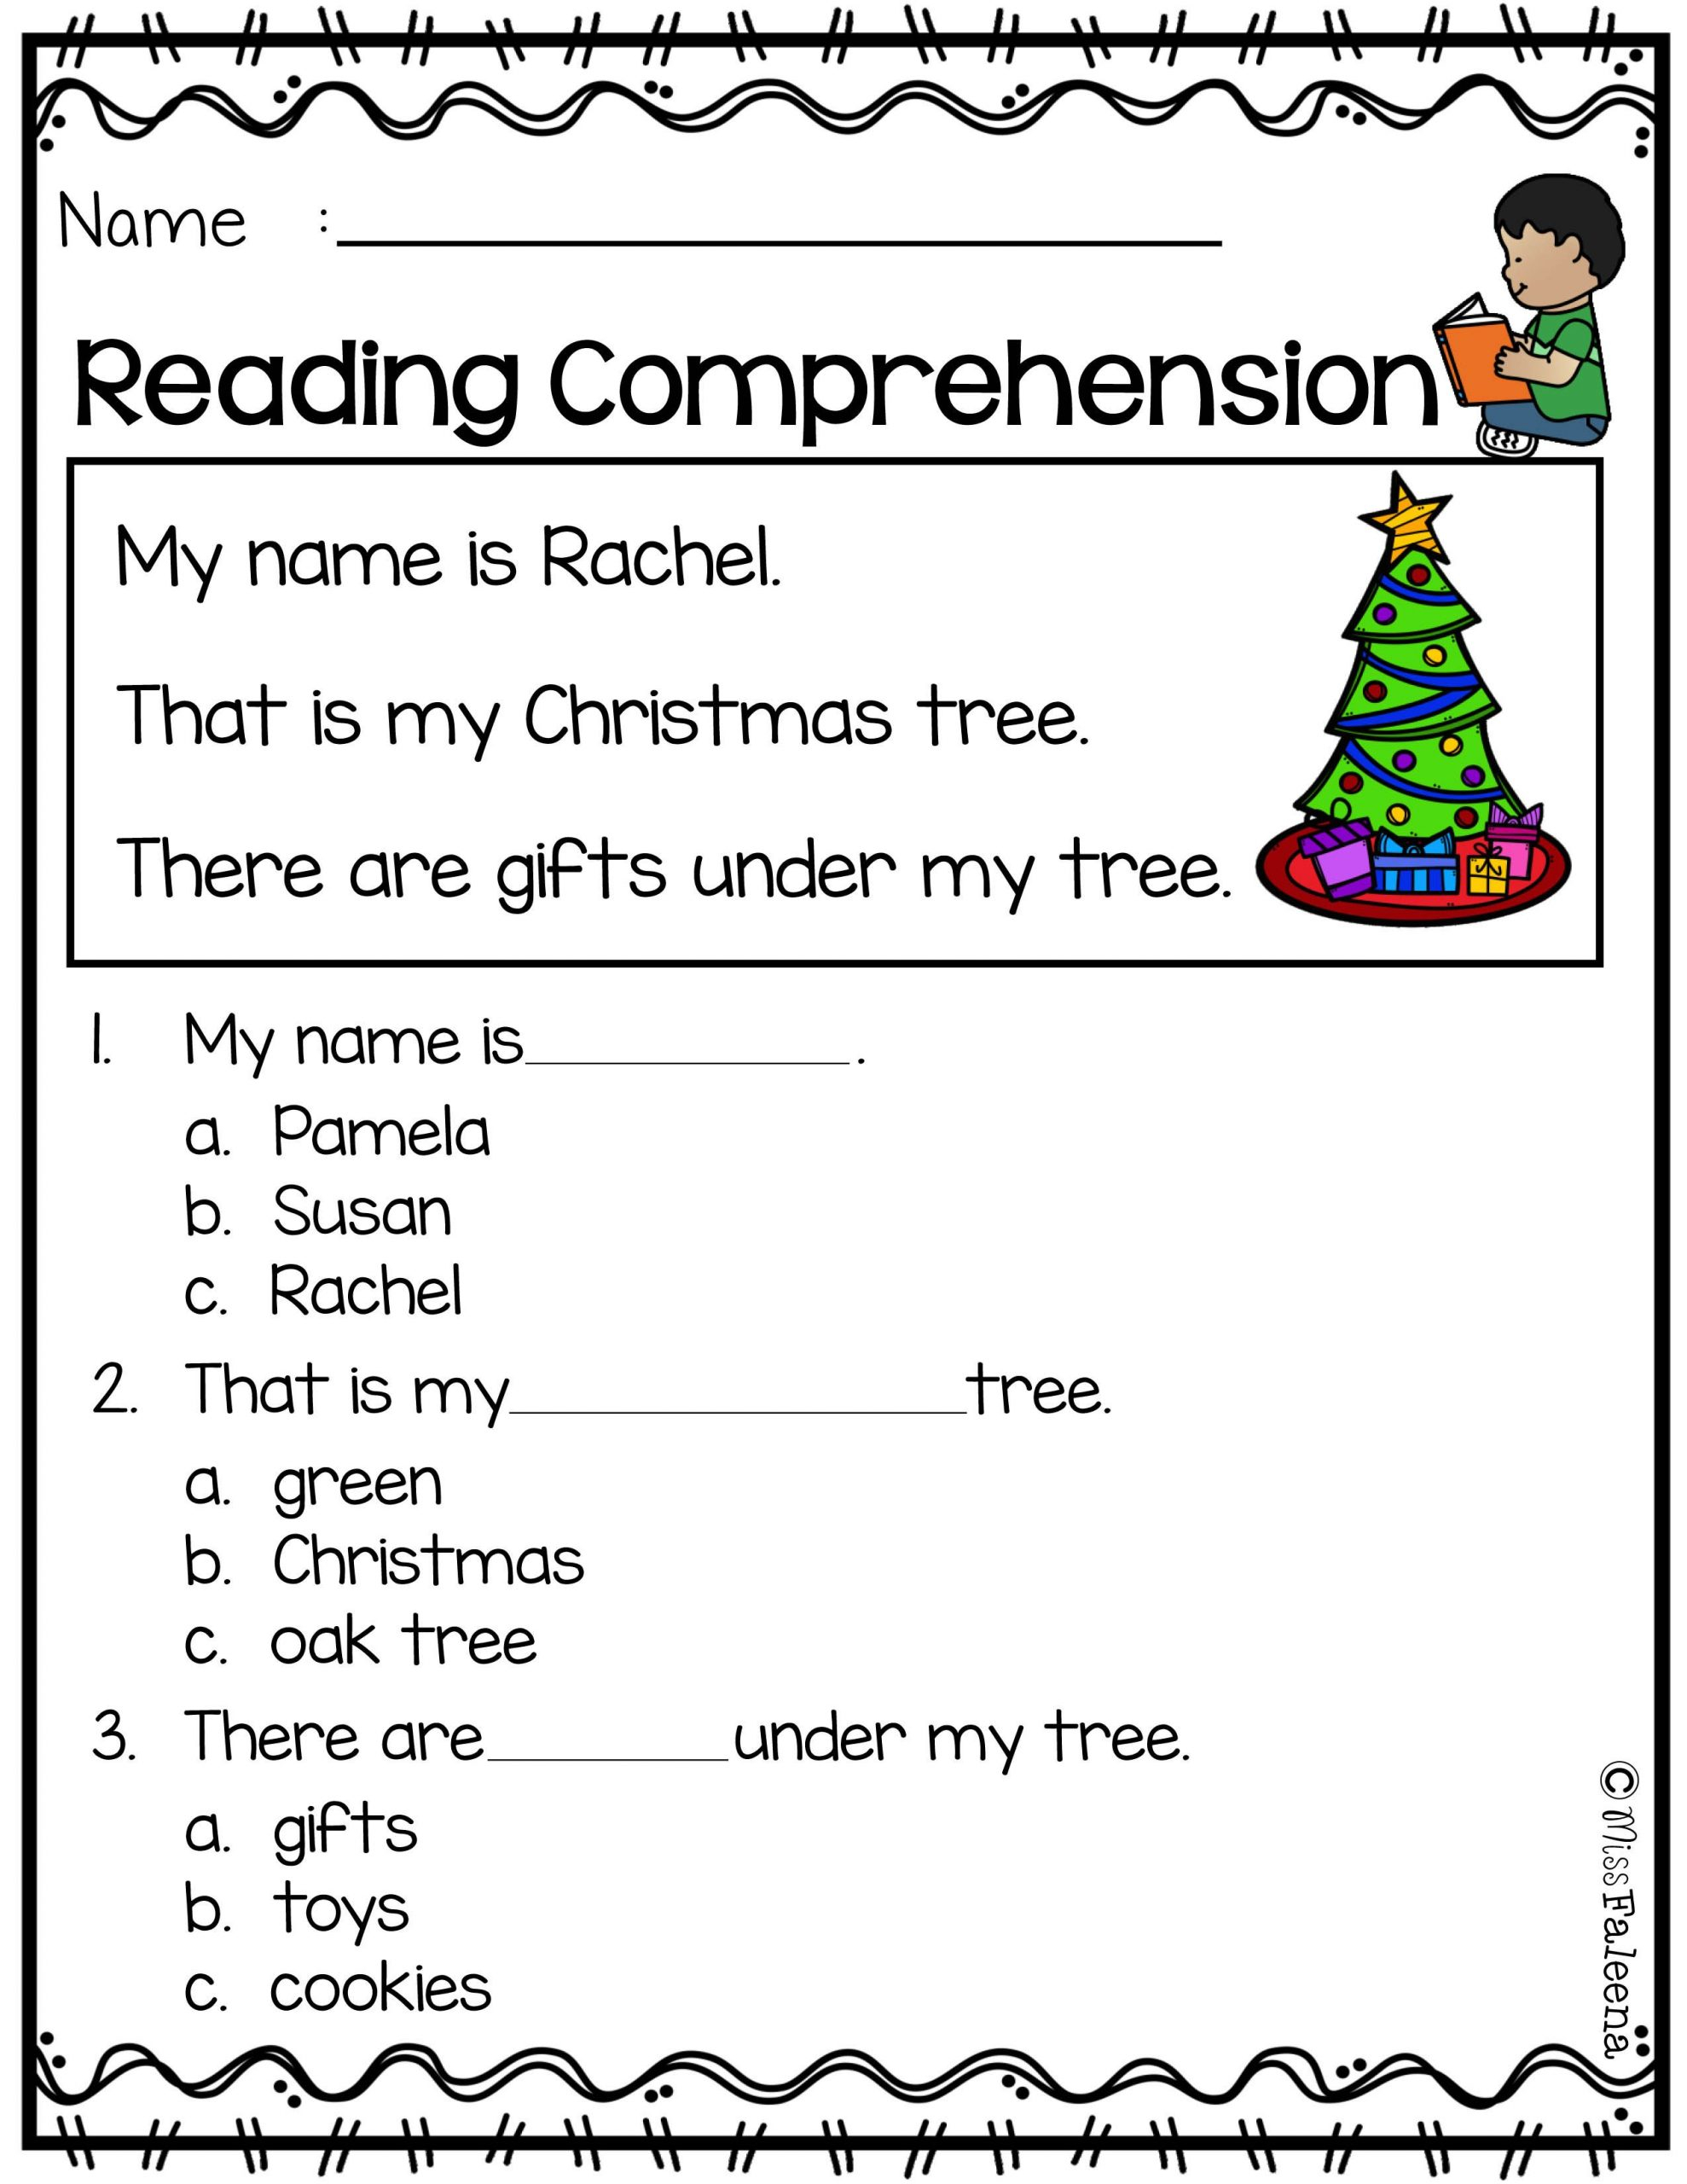 Halloween Reading Comprehension Worksheets For First Grade Free First 